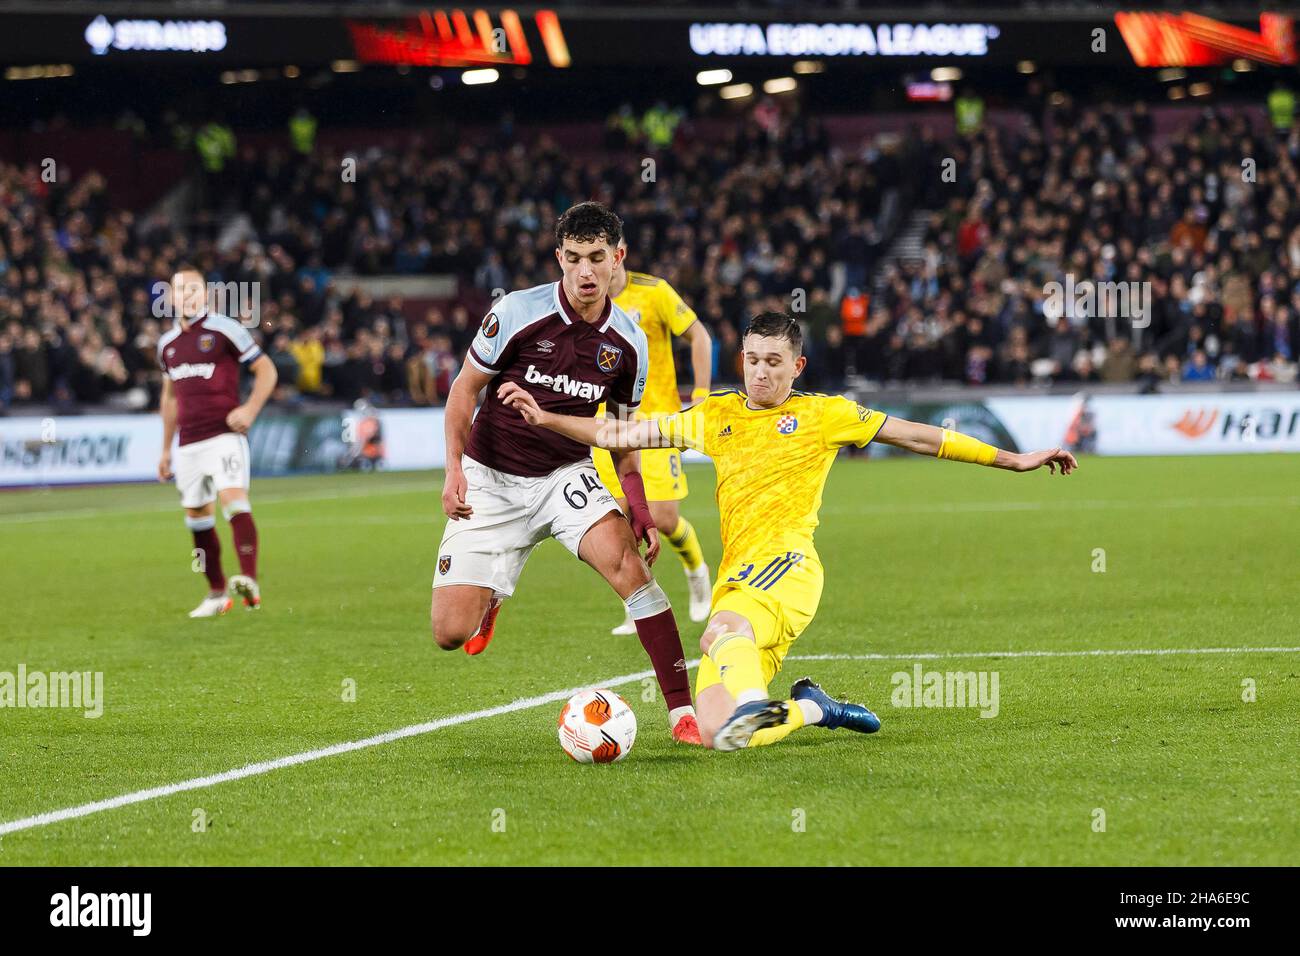 London, UK. 09th Dec, 2021. Sonny Perkins of West Ham United is tackled by Daniel Stefulj of Dinamo Zagreb during the UEFA Europa League Group H match between West Ham United and Dinamo Zagreb at London Stadium on December 9th 2021 in London, England. (Photo by Daniel Chesterton/phcimages.com) Credit: PHC Images/Alamy Live News Stock Photo